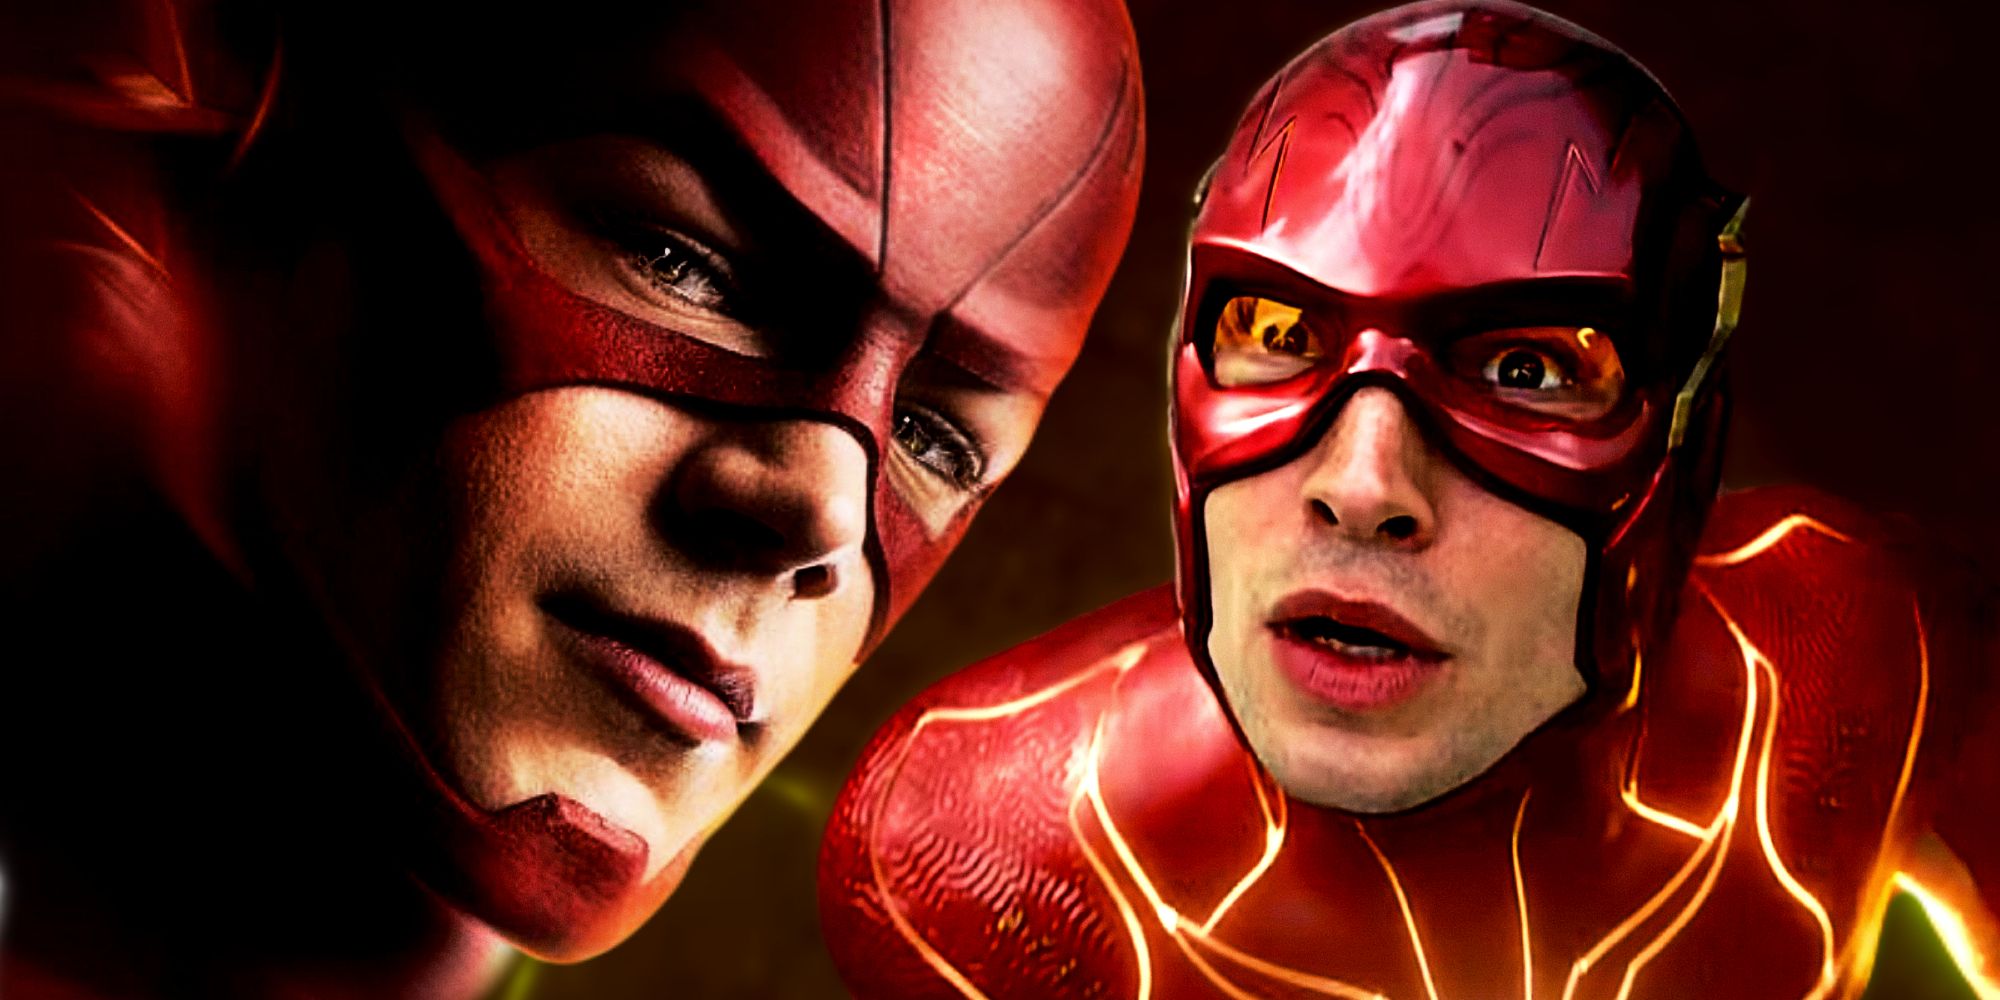 Grant Gustin and Ezra Miller as Barry Allen in The Flash Show and Movie